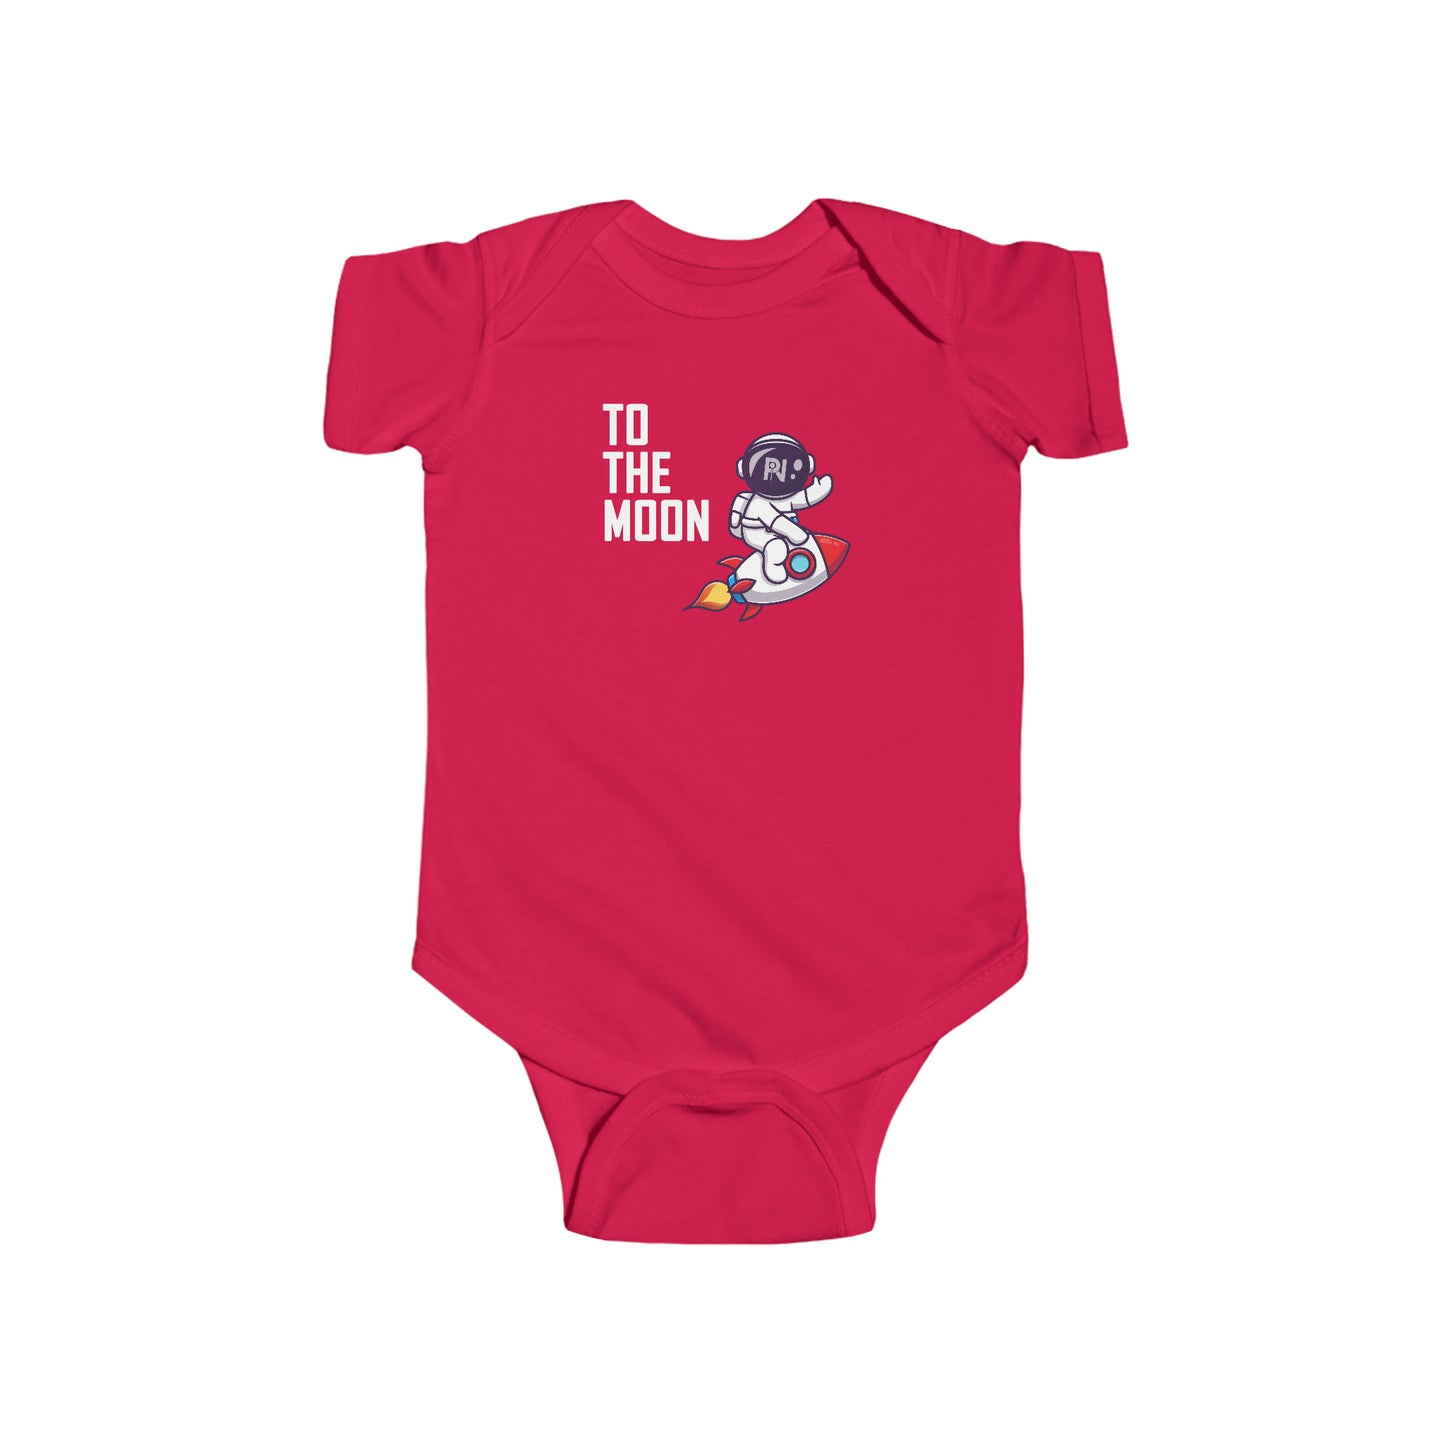 Infant Fine Jersey Bodysuit (To the moon)